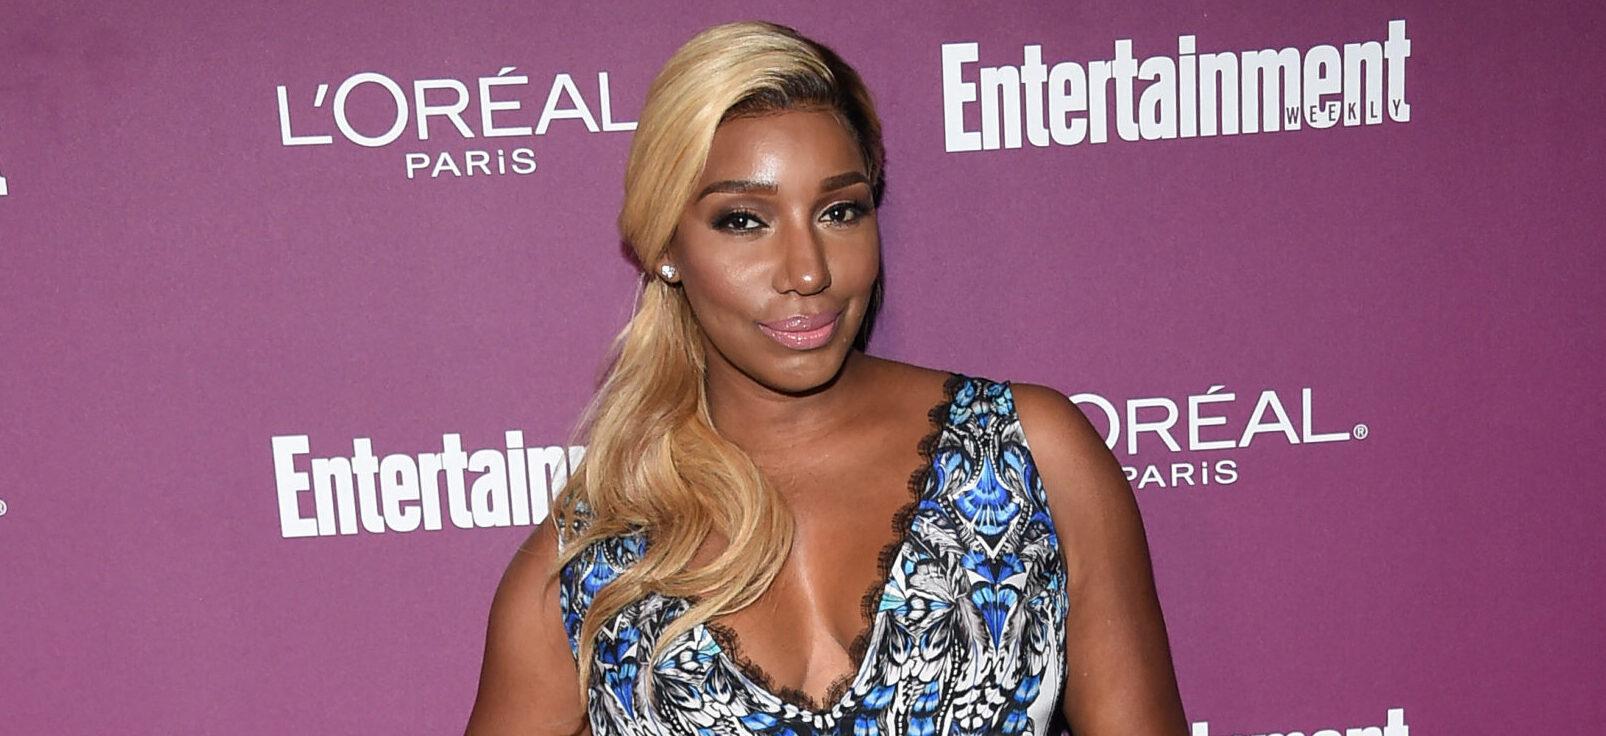 NeNe Leakes Debuts Elegant Bangs Hairstyle Shortly After ‘Soft Era’ Announcement